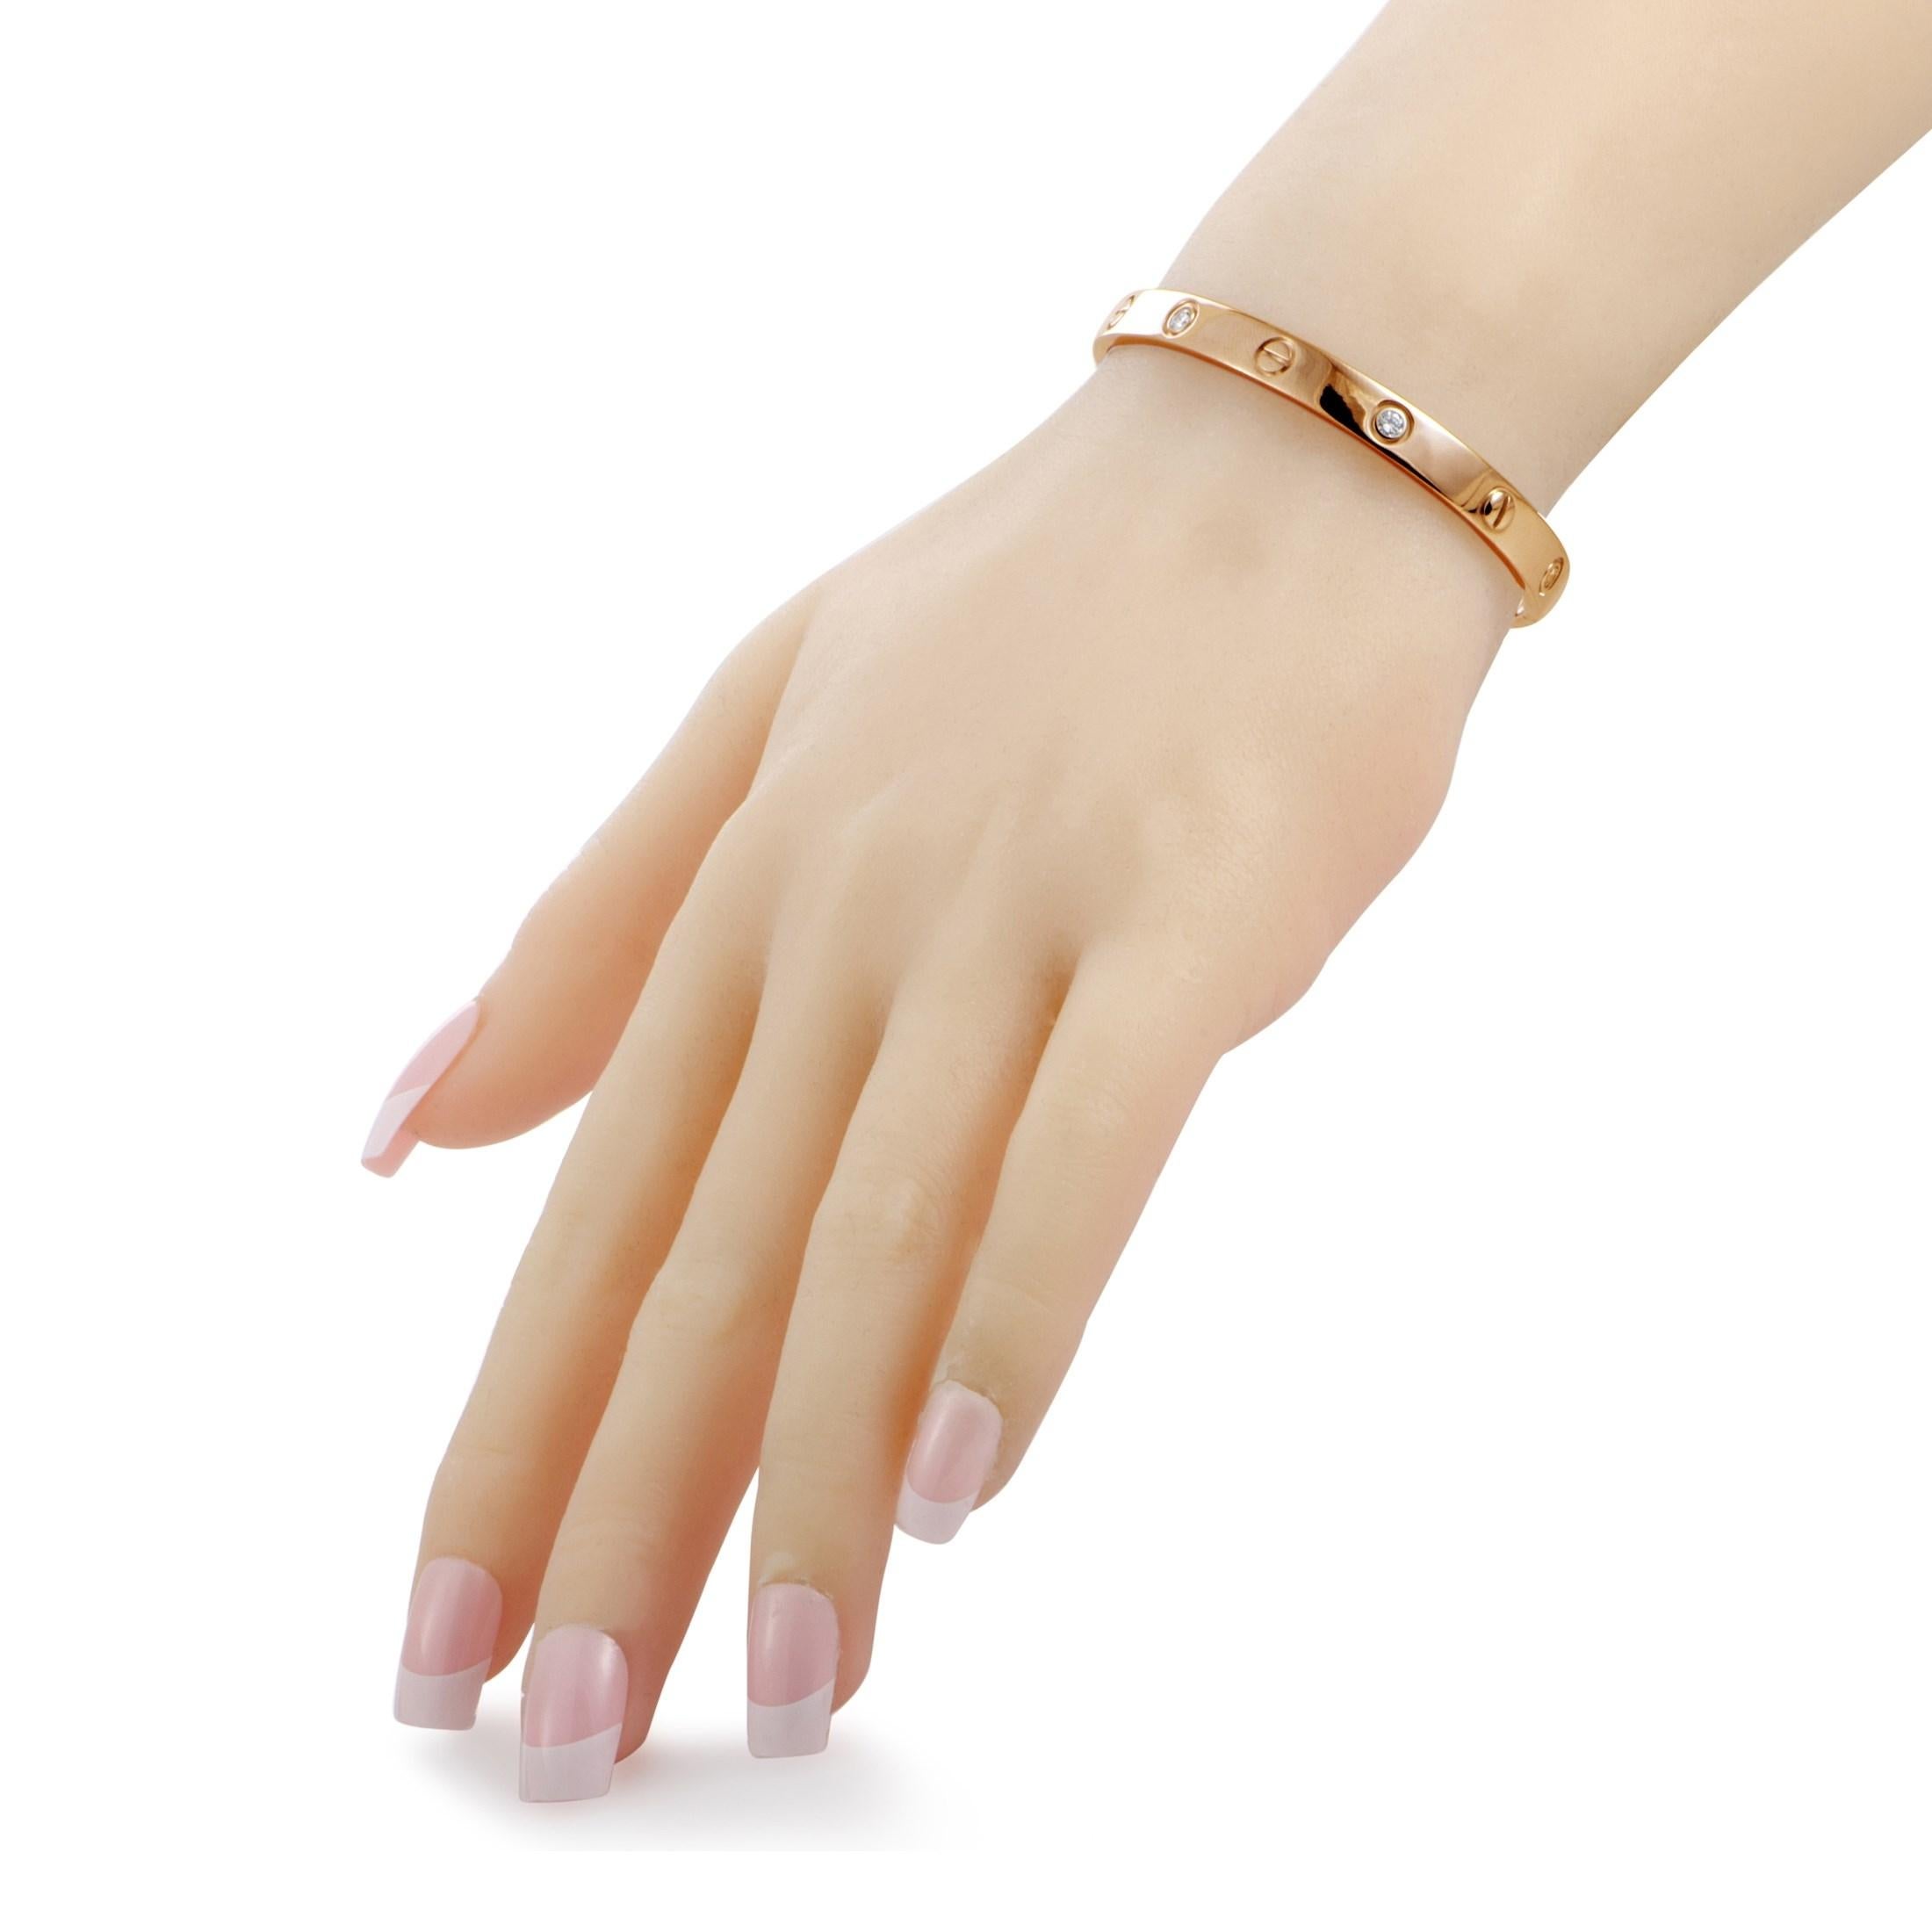 This splendidly classic piece from Cartier’s iconic “LOVE” collection boasts an exquisitely refined design with famous screw motifs, symbolizing eternal affection and commitment. This bracelet is the new model version, and is beautifully made of